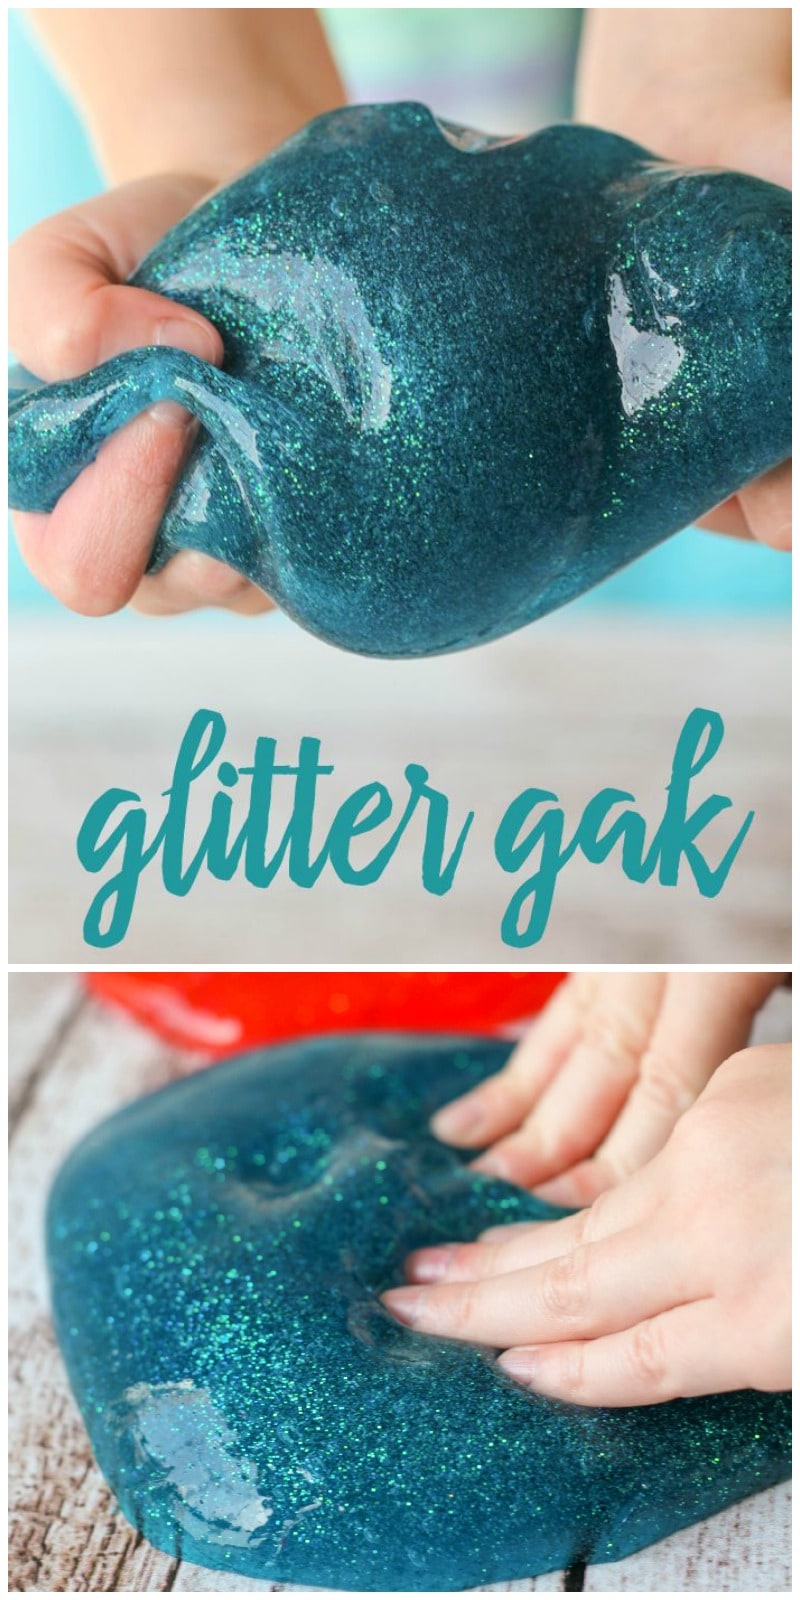 Homemade Glitter Gak recipe - the kids LOVE this stuff!! It takes a minute to make and provides hours of entertainment. Recipe on { lilluna.com }